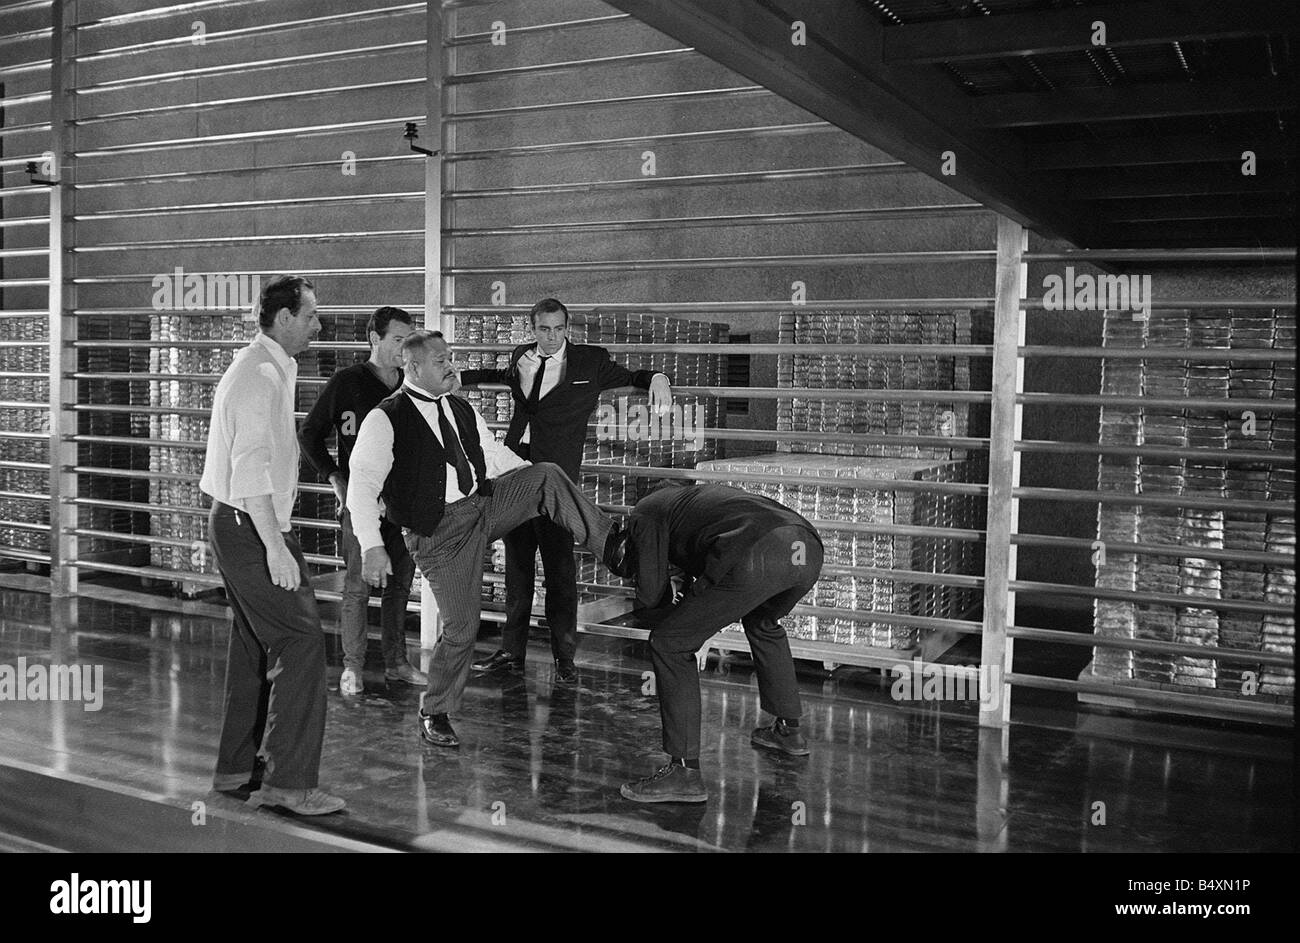 Film Goldfinger 1964 Sean Connery as James Bond 007 receives instuction from the director on the fight sequence with Goldfinger Stock Photo